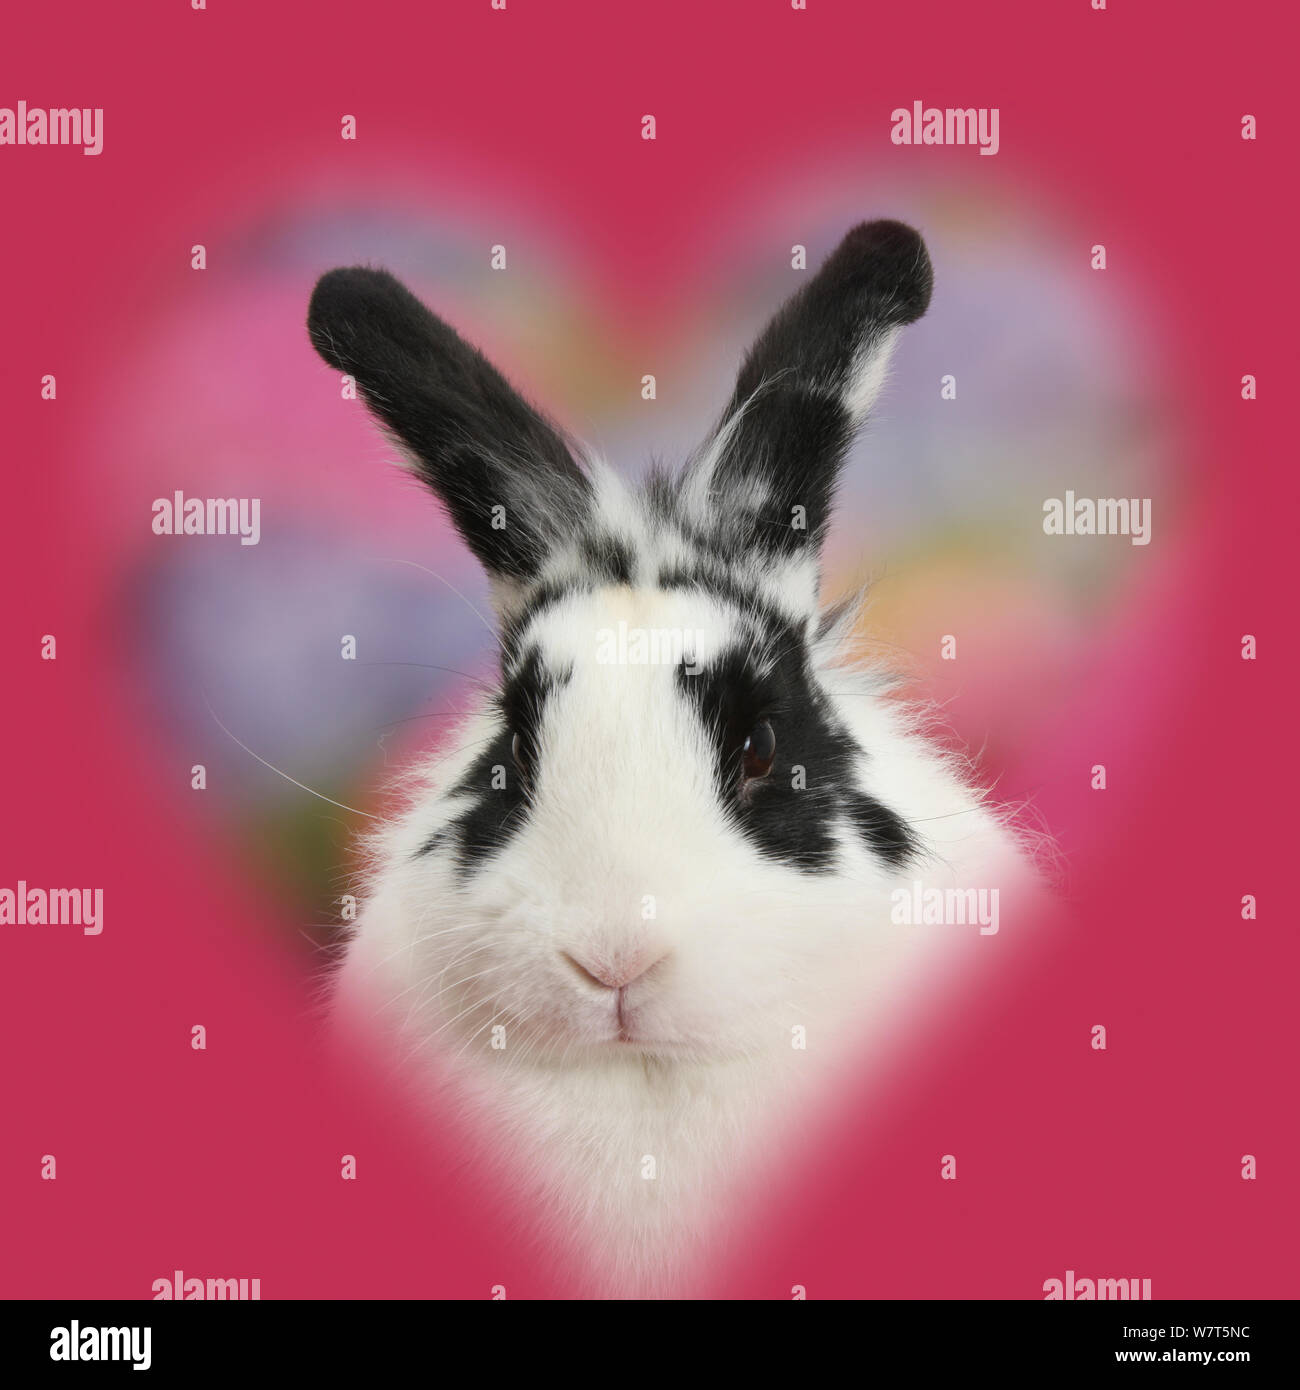 Black-and-white rabbit, Bandit, with soft heart surround. Stock Photo